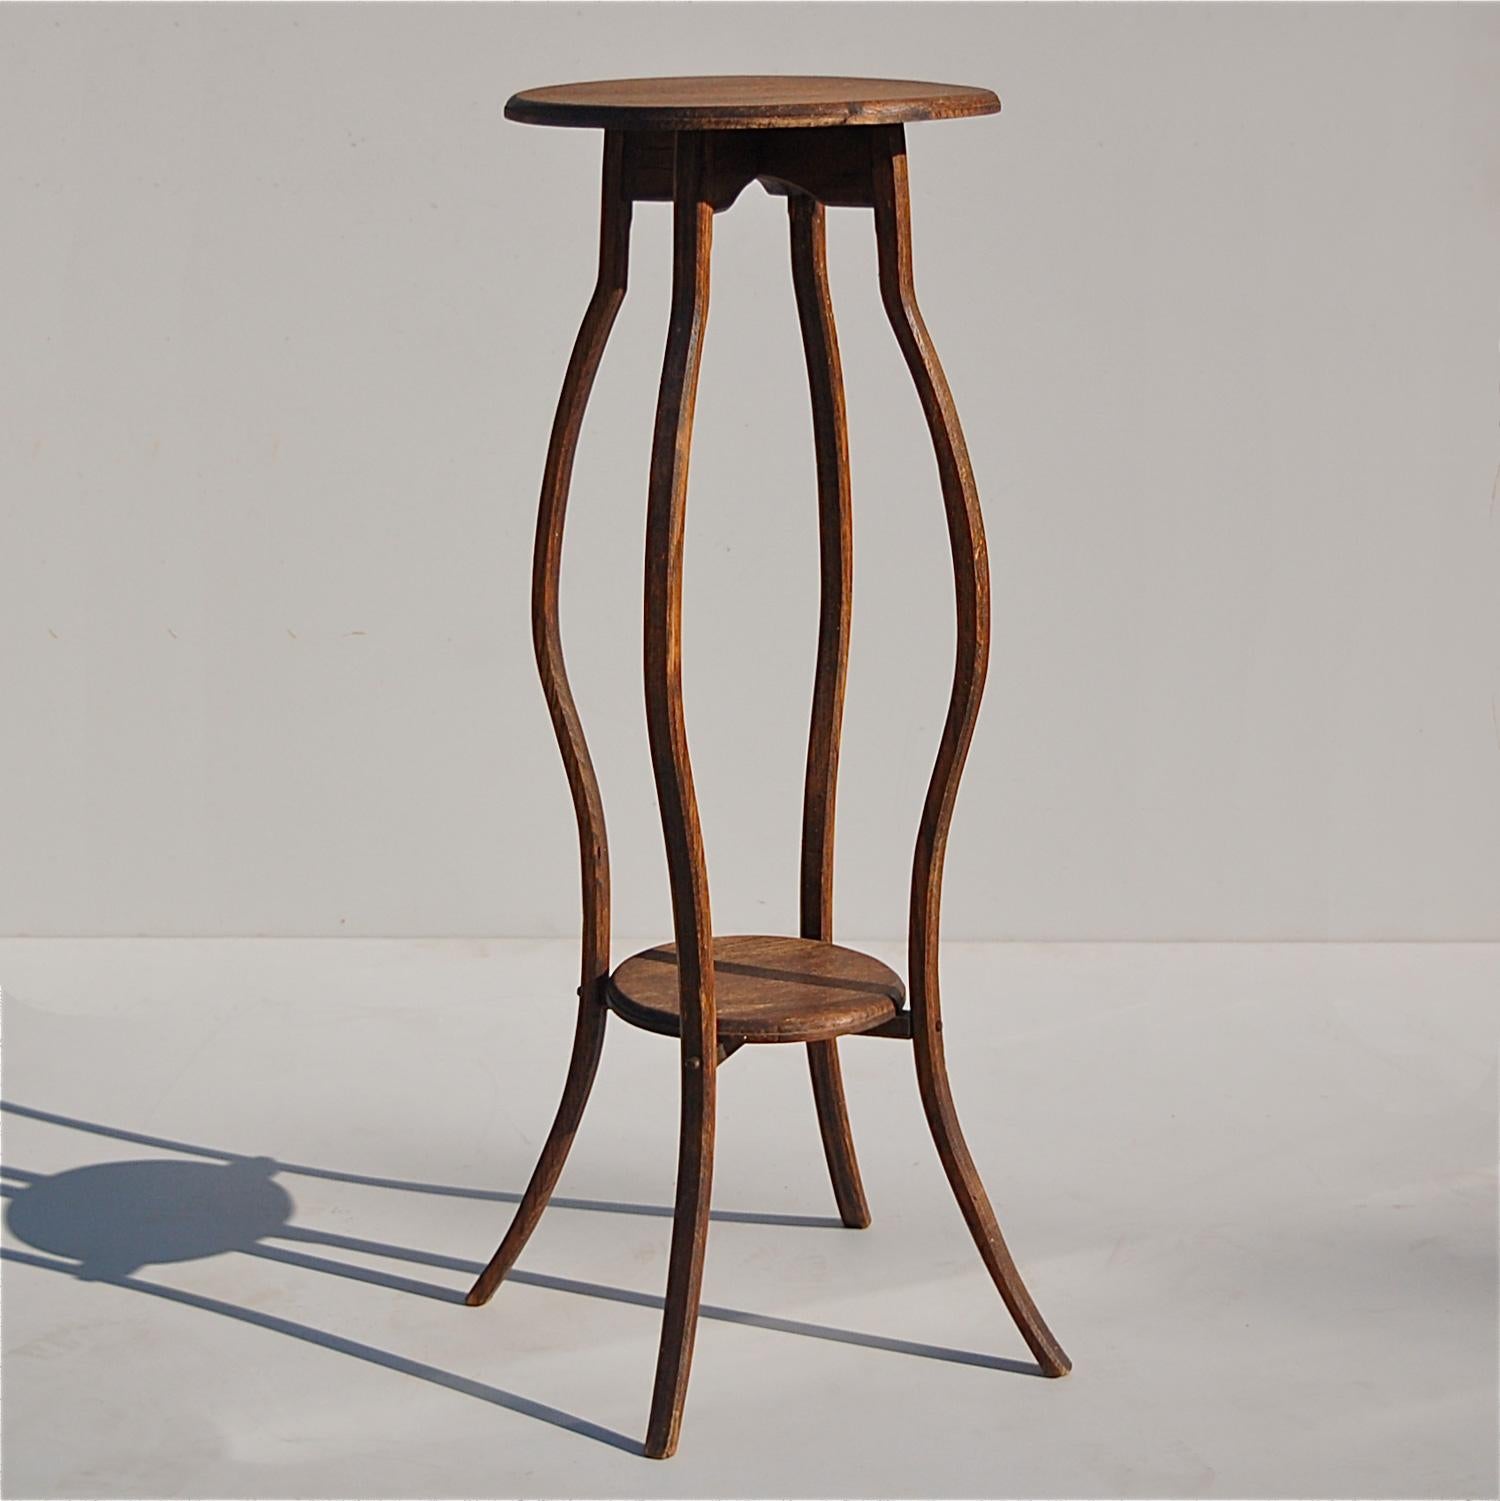 Handmade, slightly rustic, tall, side table, pedestal table, display table or piëdestal with elongated, slim line curved legs. The elegant curvature connects two round platforms suitable for displaying small decorative items or plants. Possibly an